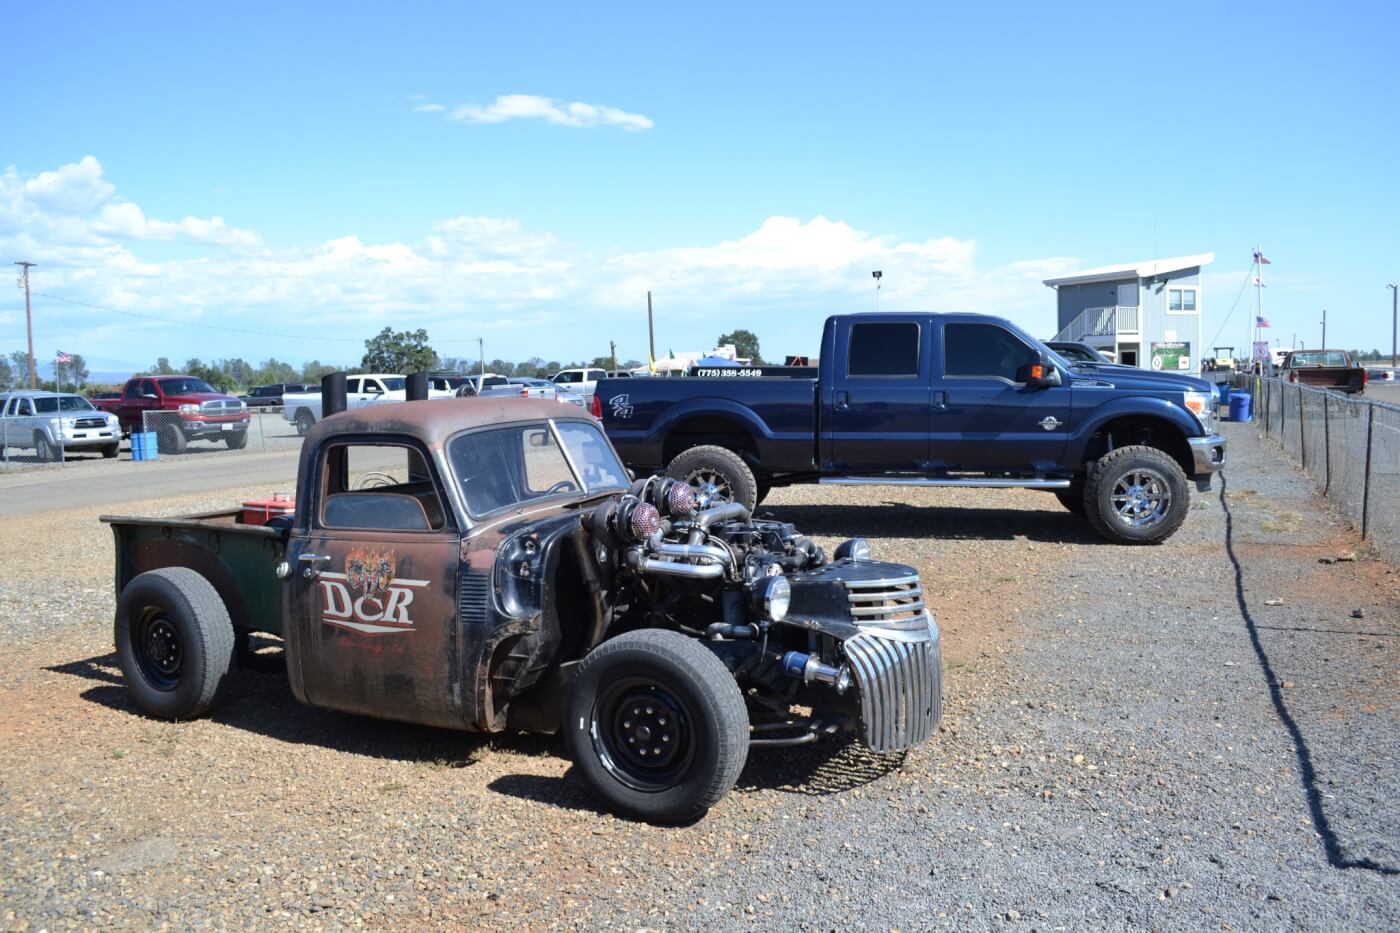 Part of the fun of diesel events is seeing things like a triple turbo rat rod parked next to a brand new 6.7l Ford. Drag race, anyone?